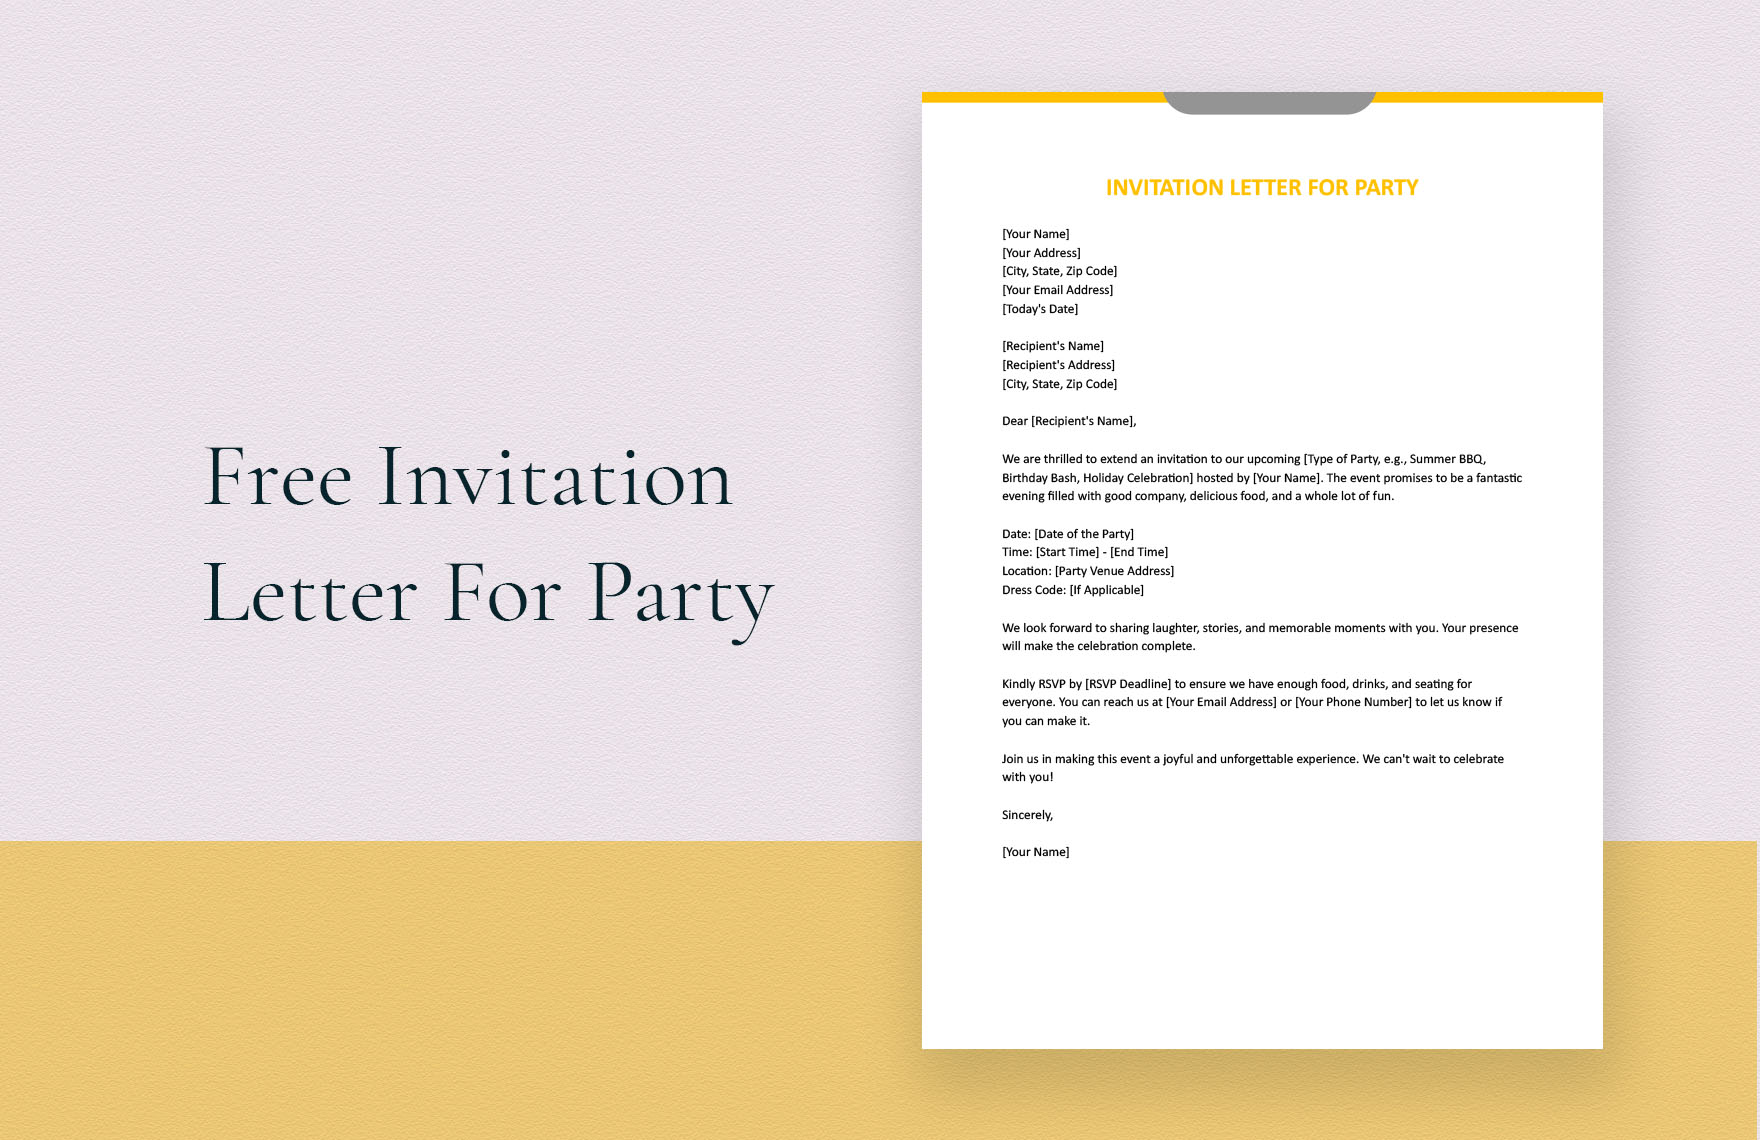 Invitation Letter For Party